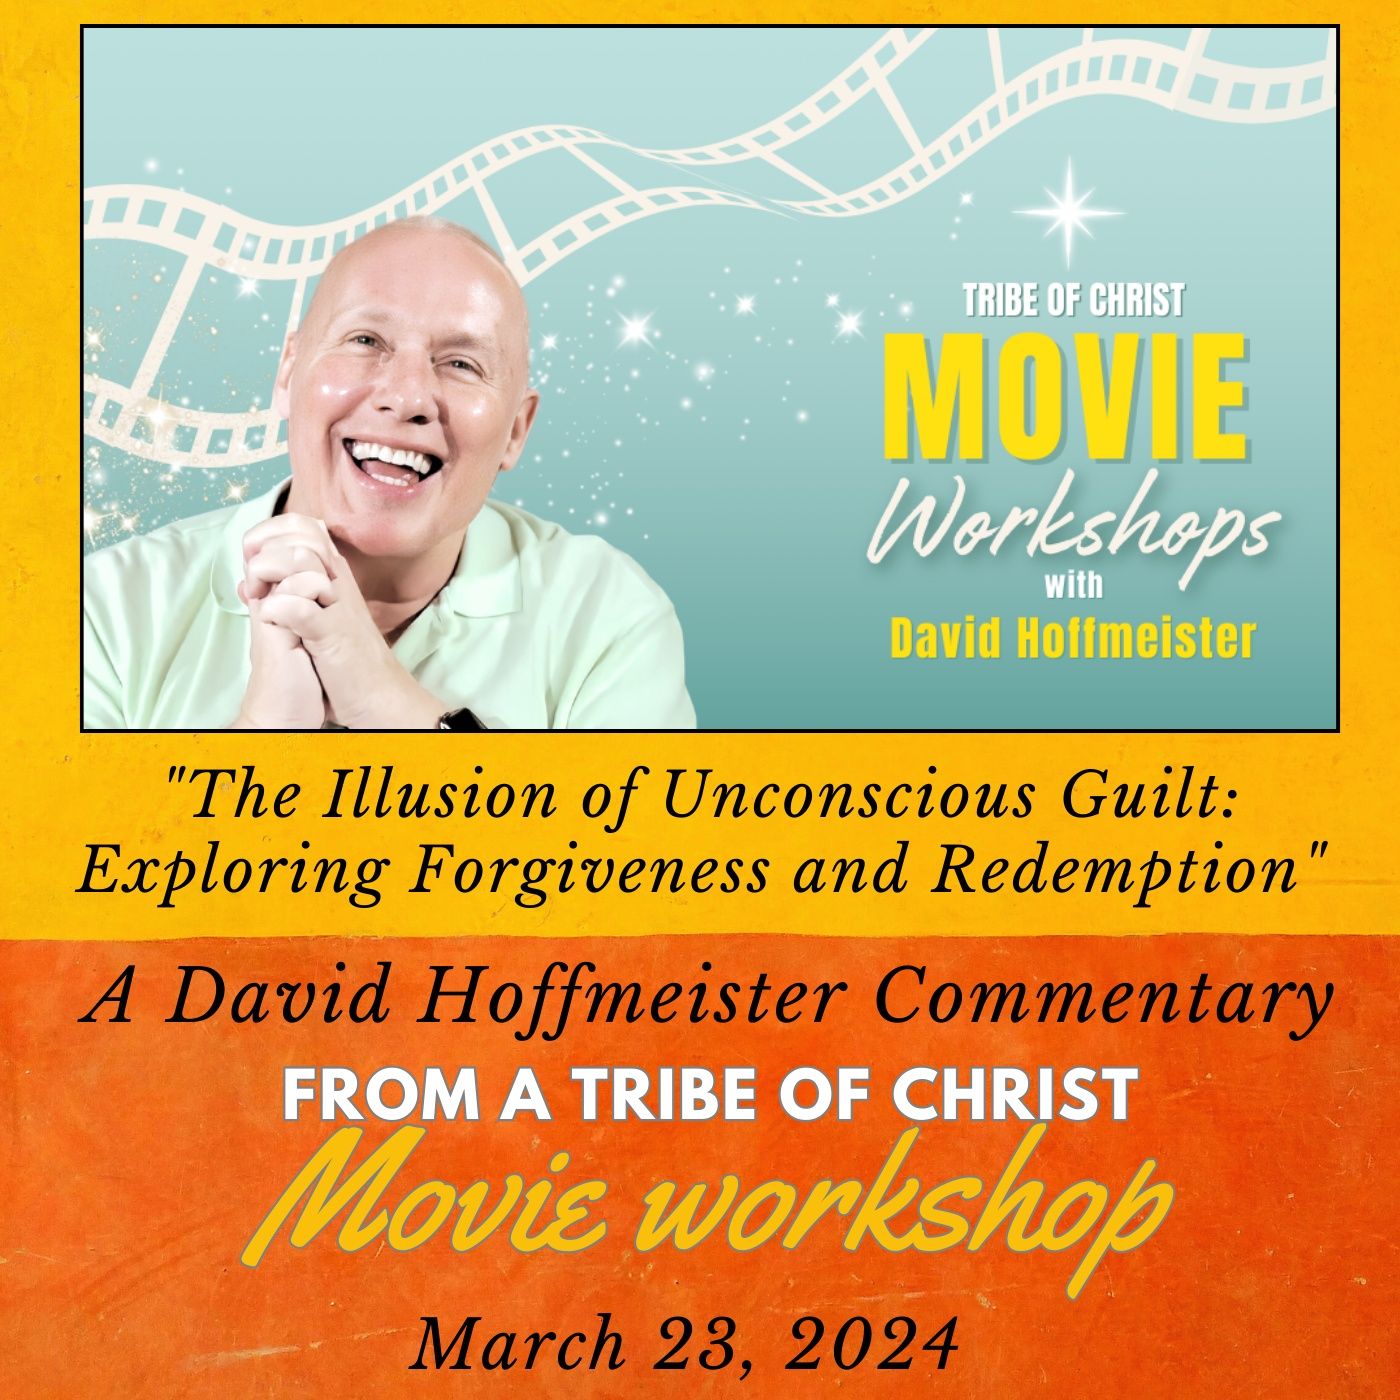 ”The Illusion of Unconscious Guilt: Exploring Forgiveness and Redemption” Movie Workshop Commentary with David Hoffmeister